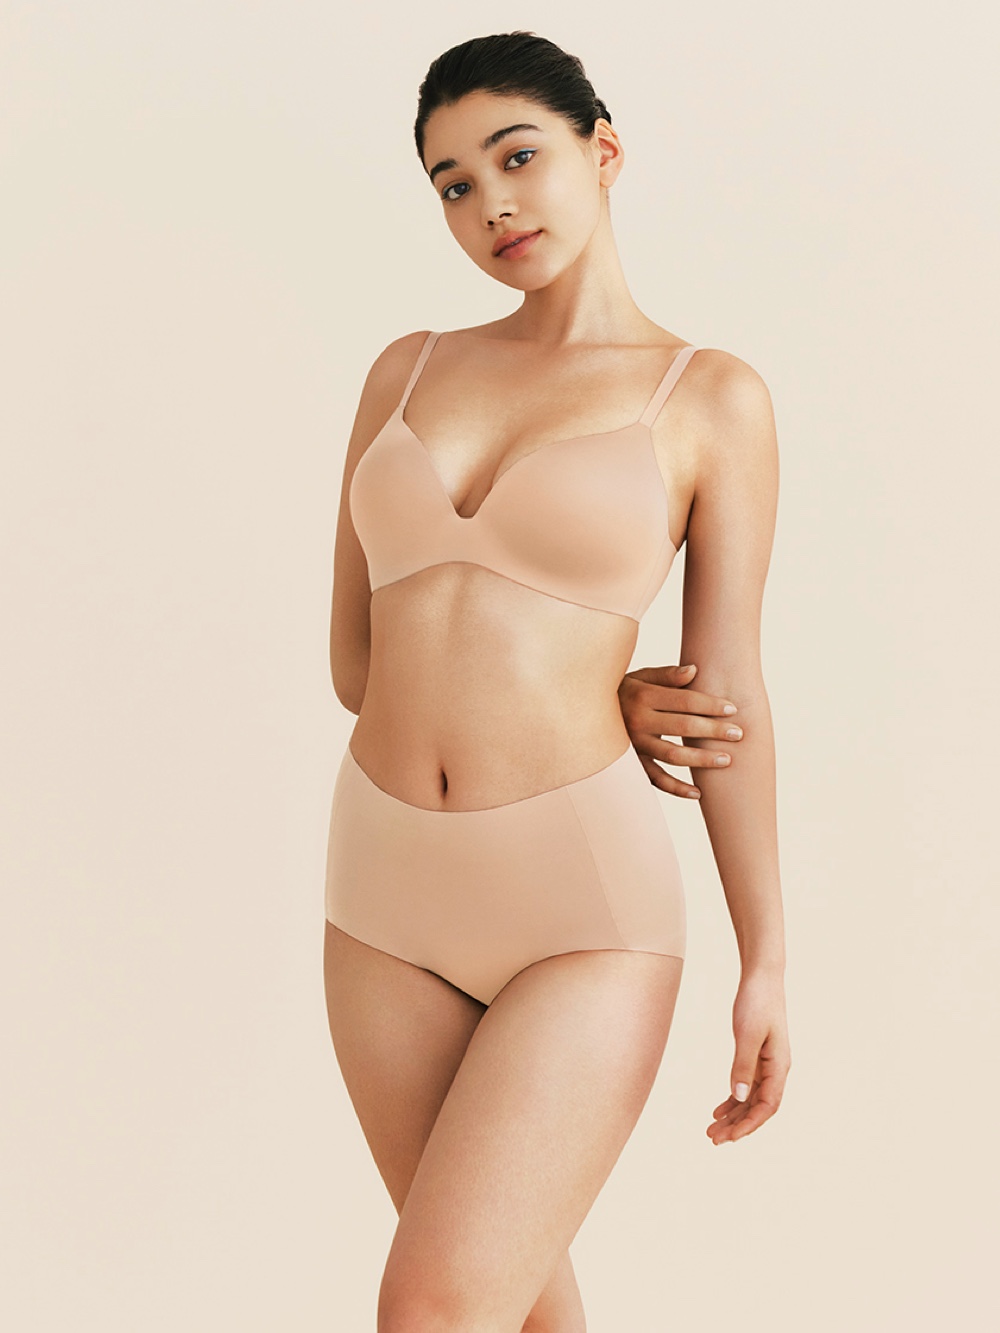 Shop looks for「AIRism Body Shaper Non-Lined Half Briefs (Smooth)、Wireless  Bra (3D Hold)」